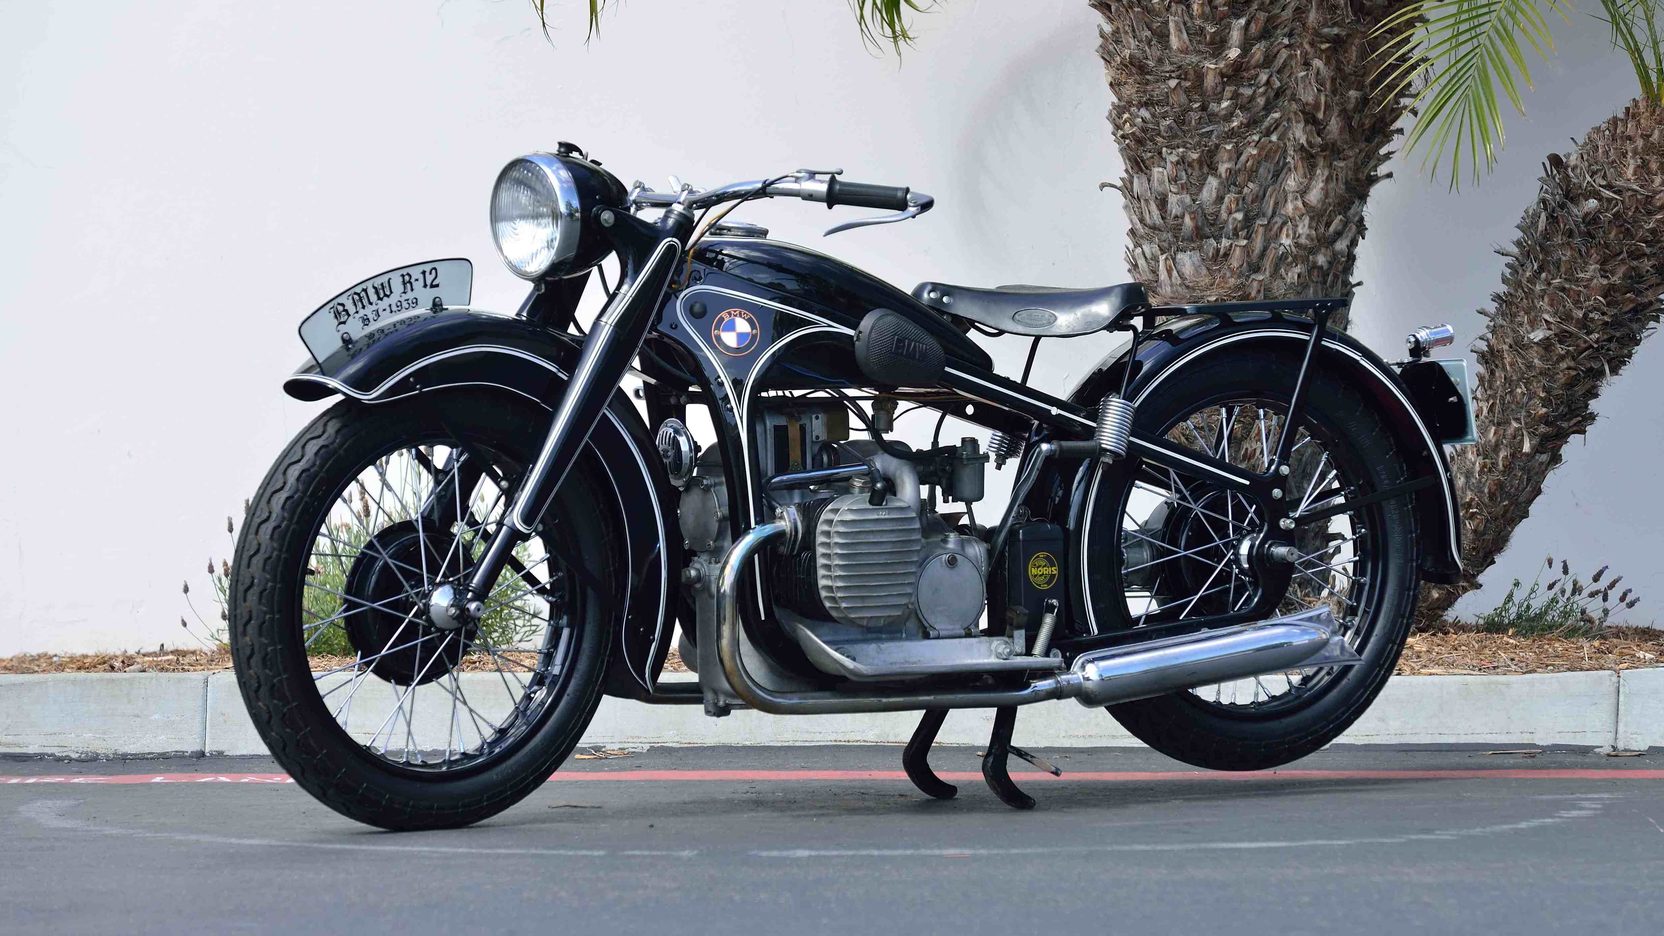 BMW's old R12 motorcycle